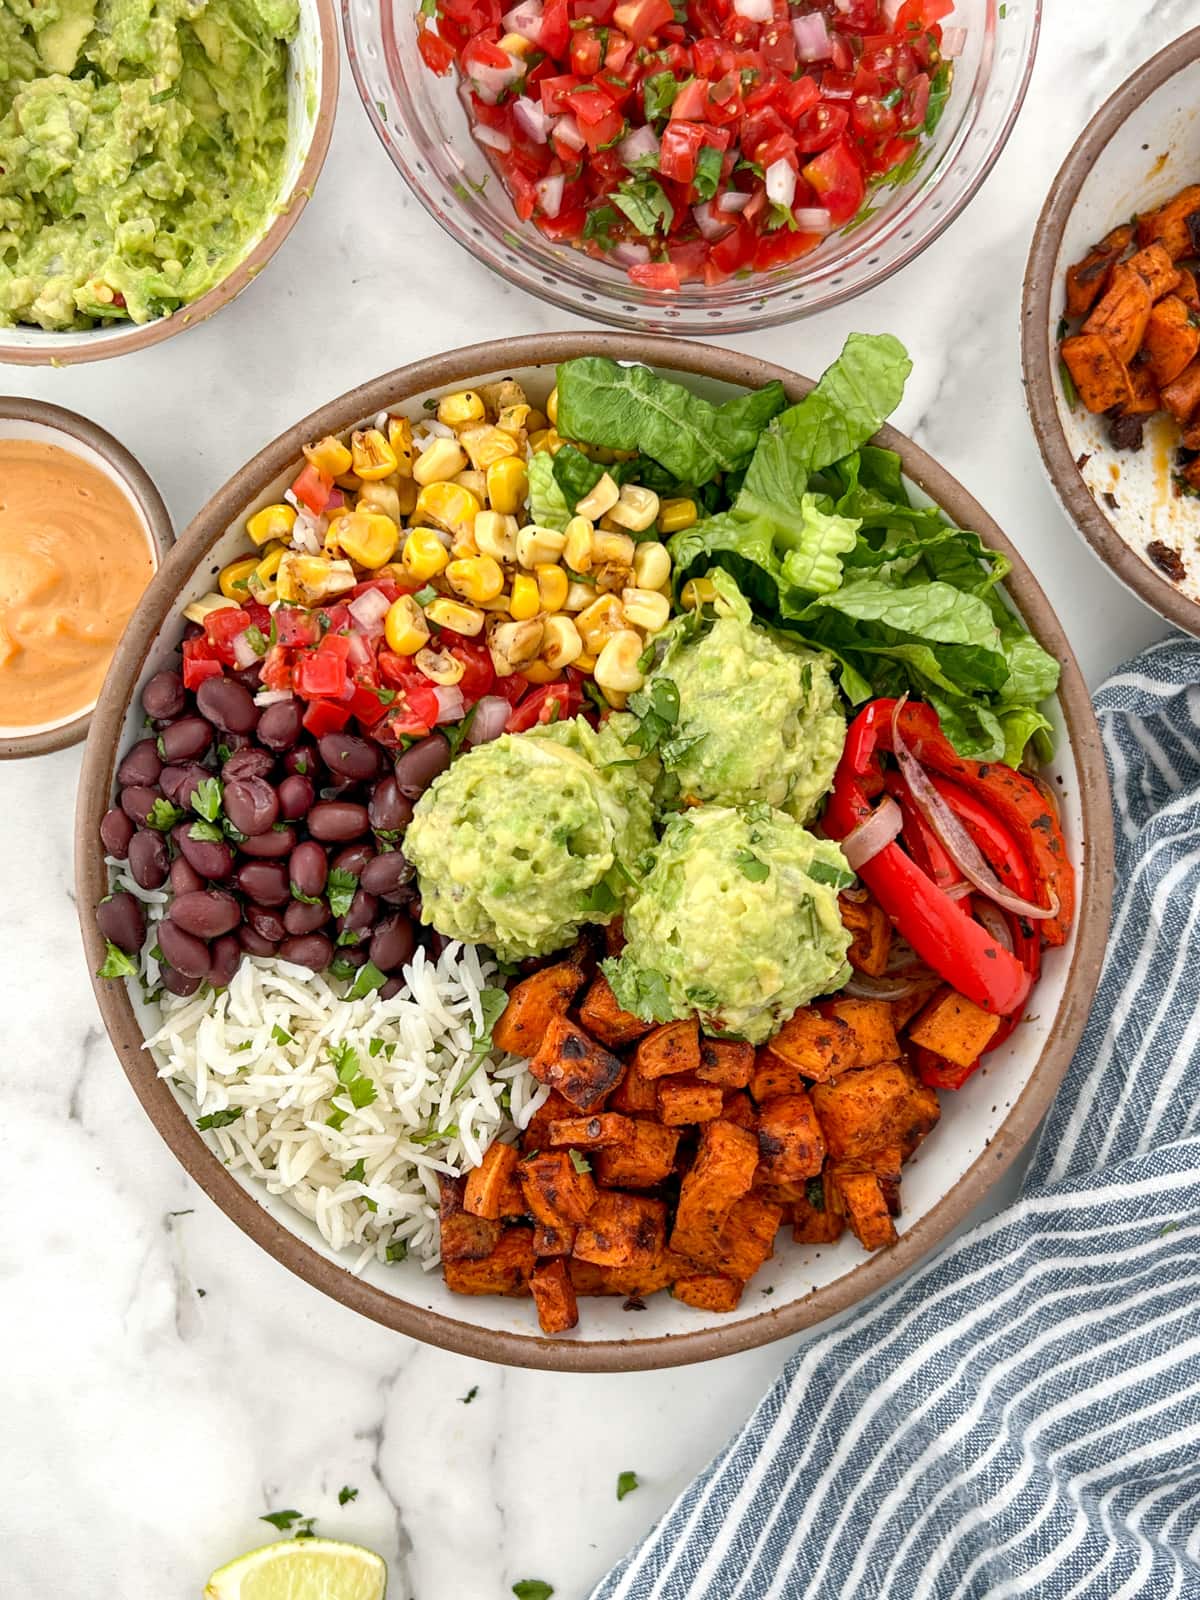 Vegetable burrito bowl surrounded by bowls of toppings including spicy cashew sauce, guacamole, pico de gallo, and fajita spiced onions and peppers.